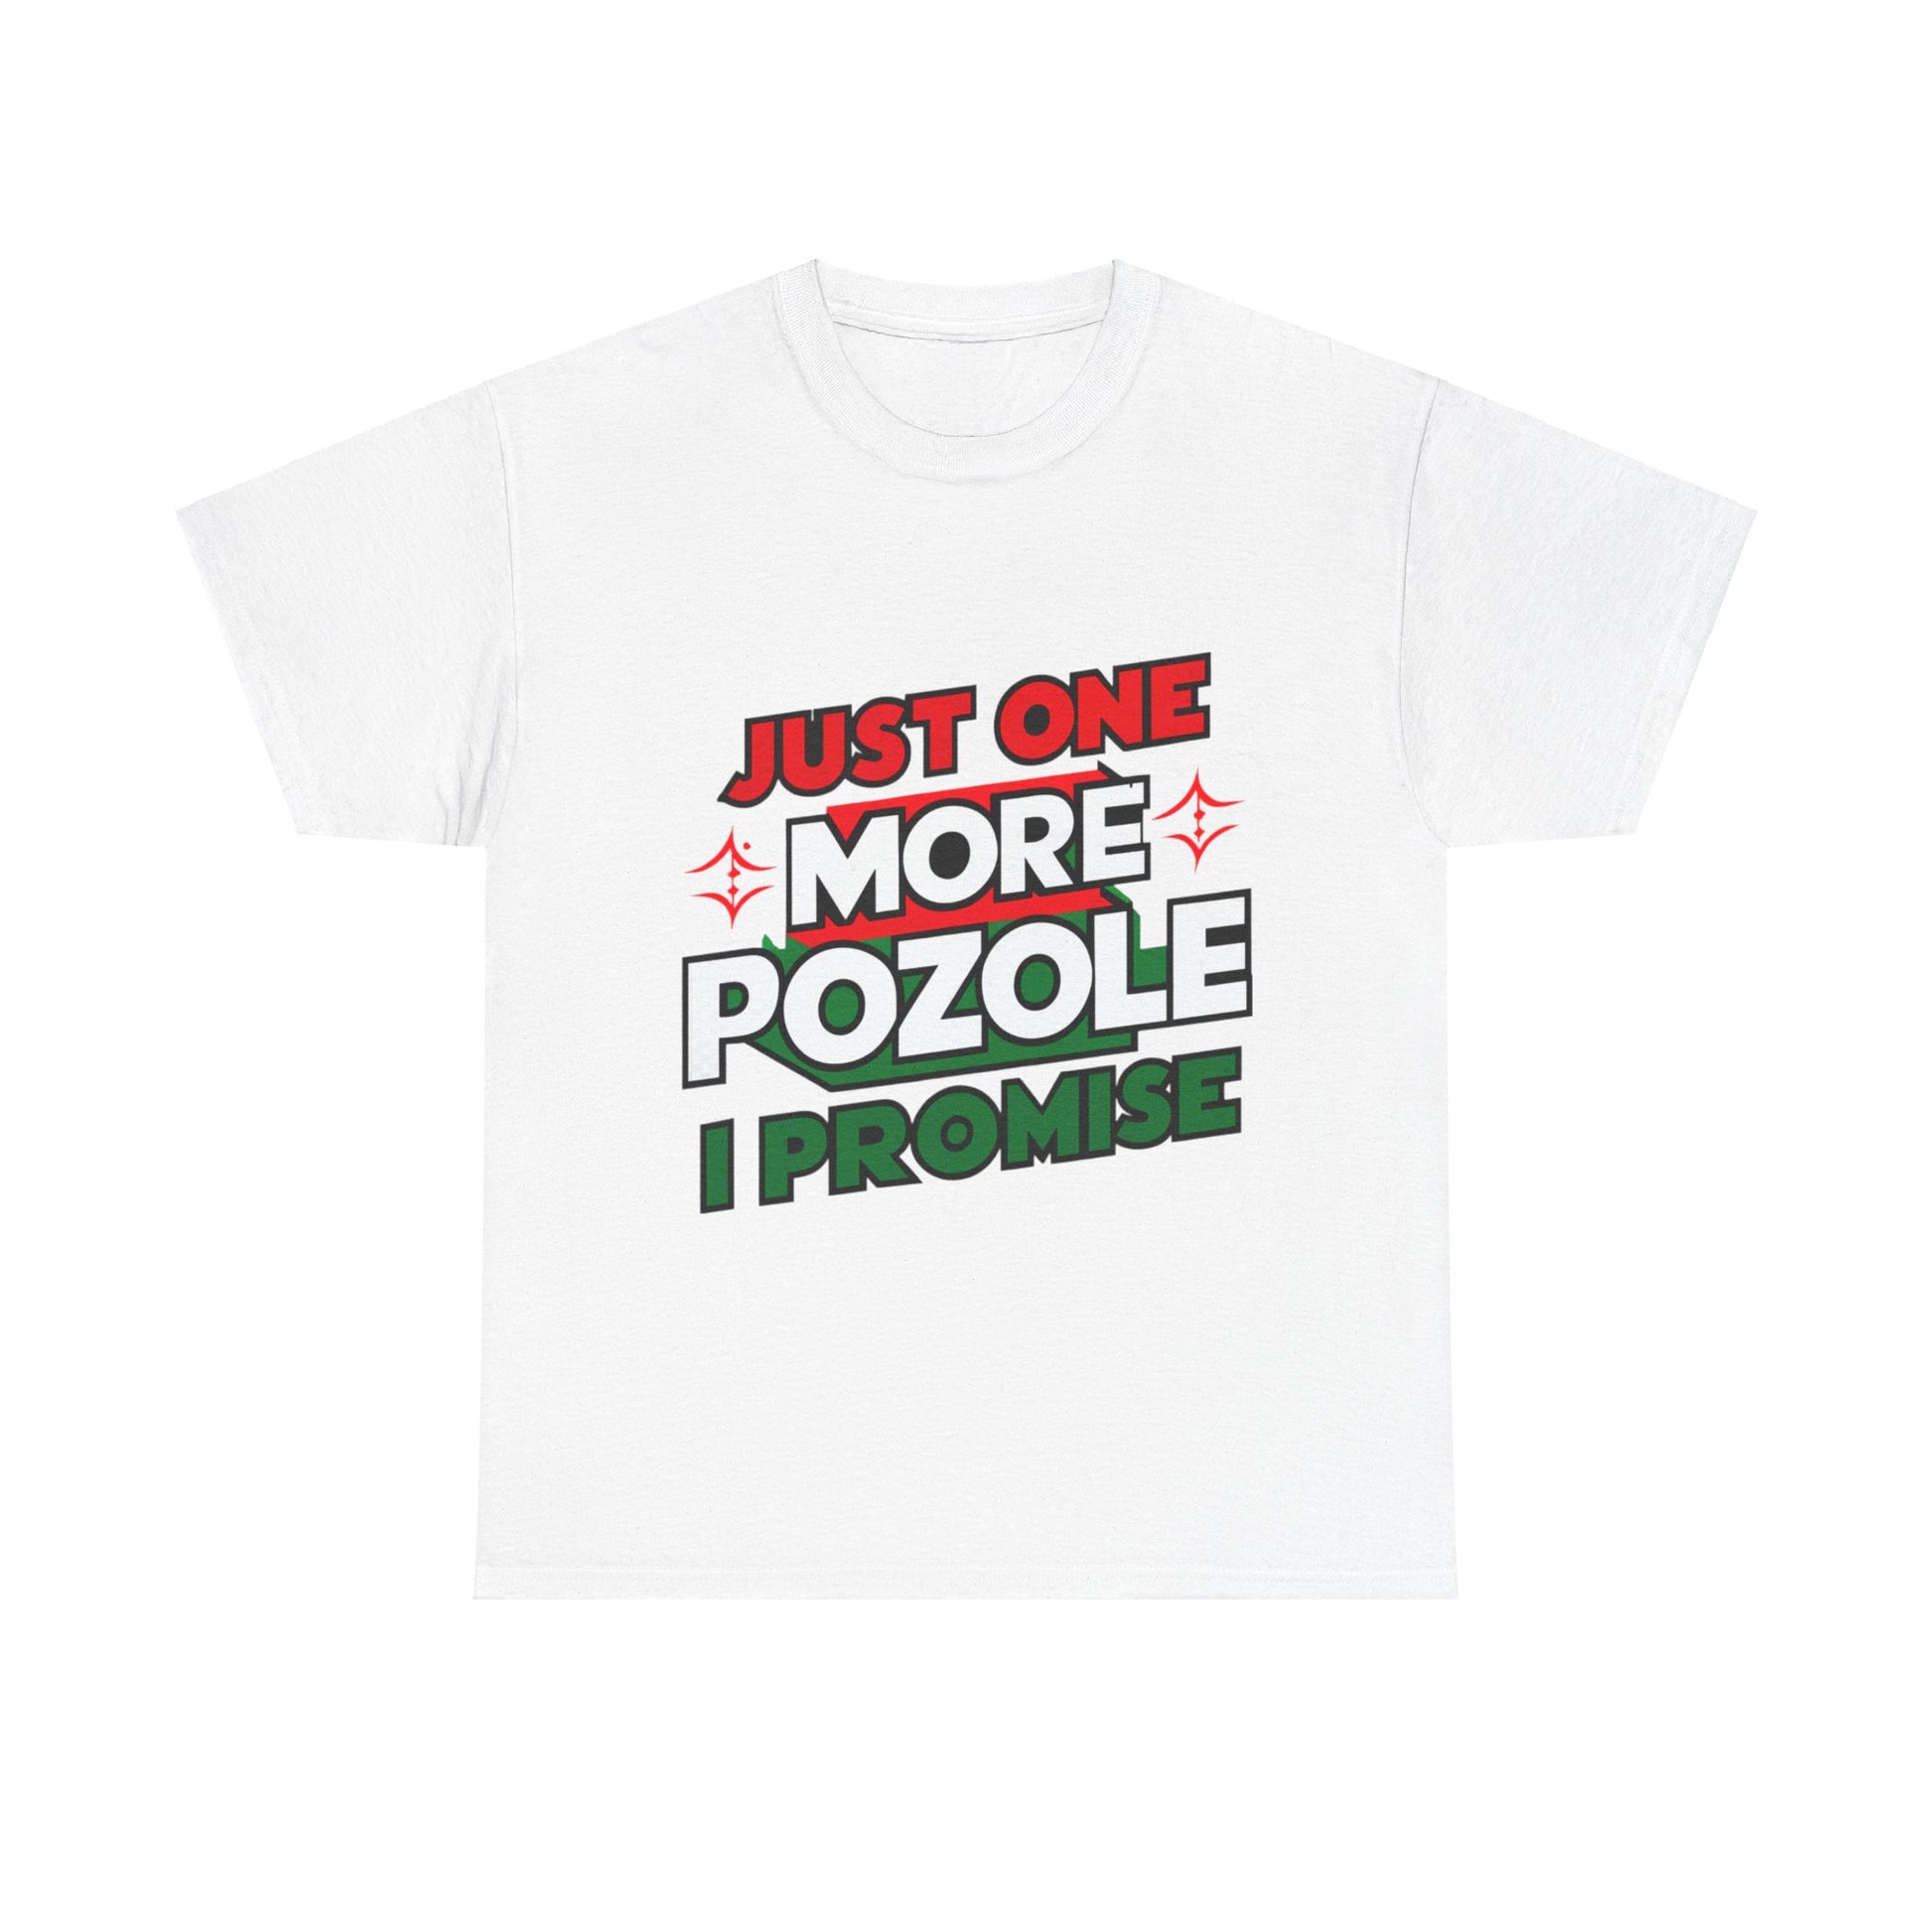 Just One More Pozole I Promise Mexican Food Graphic Unisex Heavy Cotton Tee Cotton Funny Humorous Graphic Soft Premium Unisex Men Women White T-shirt Birthday Gift-10